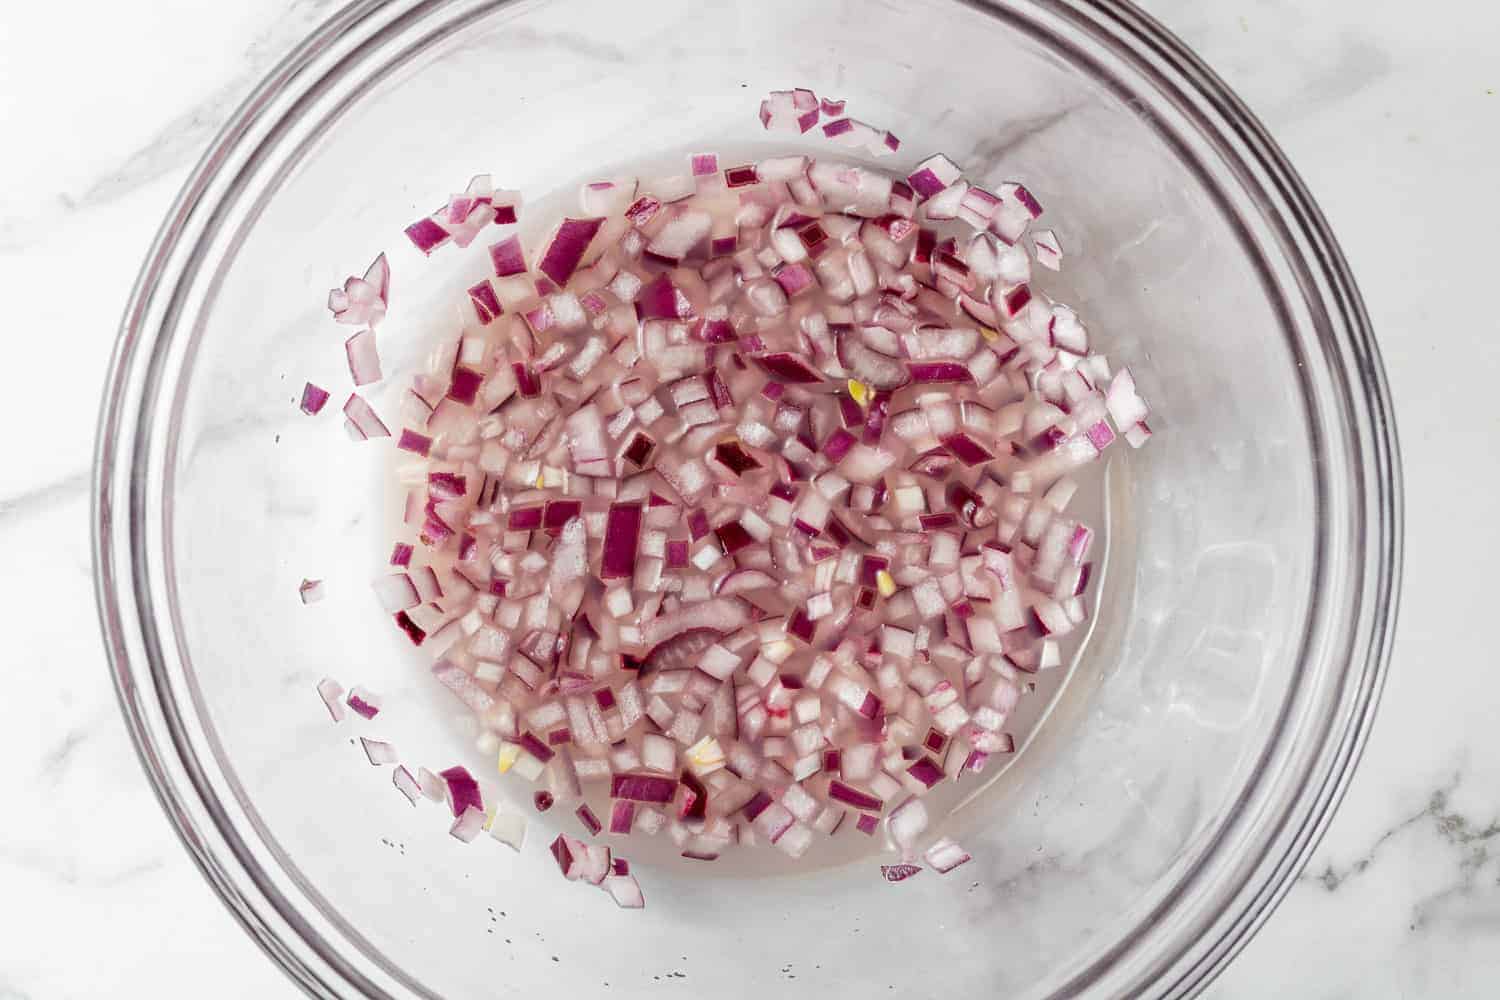 Onions in lime juice in a clear glass bowl.